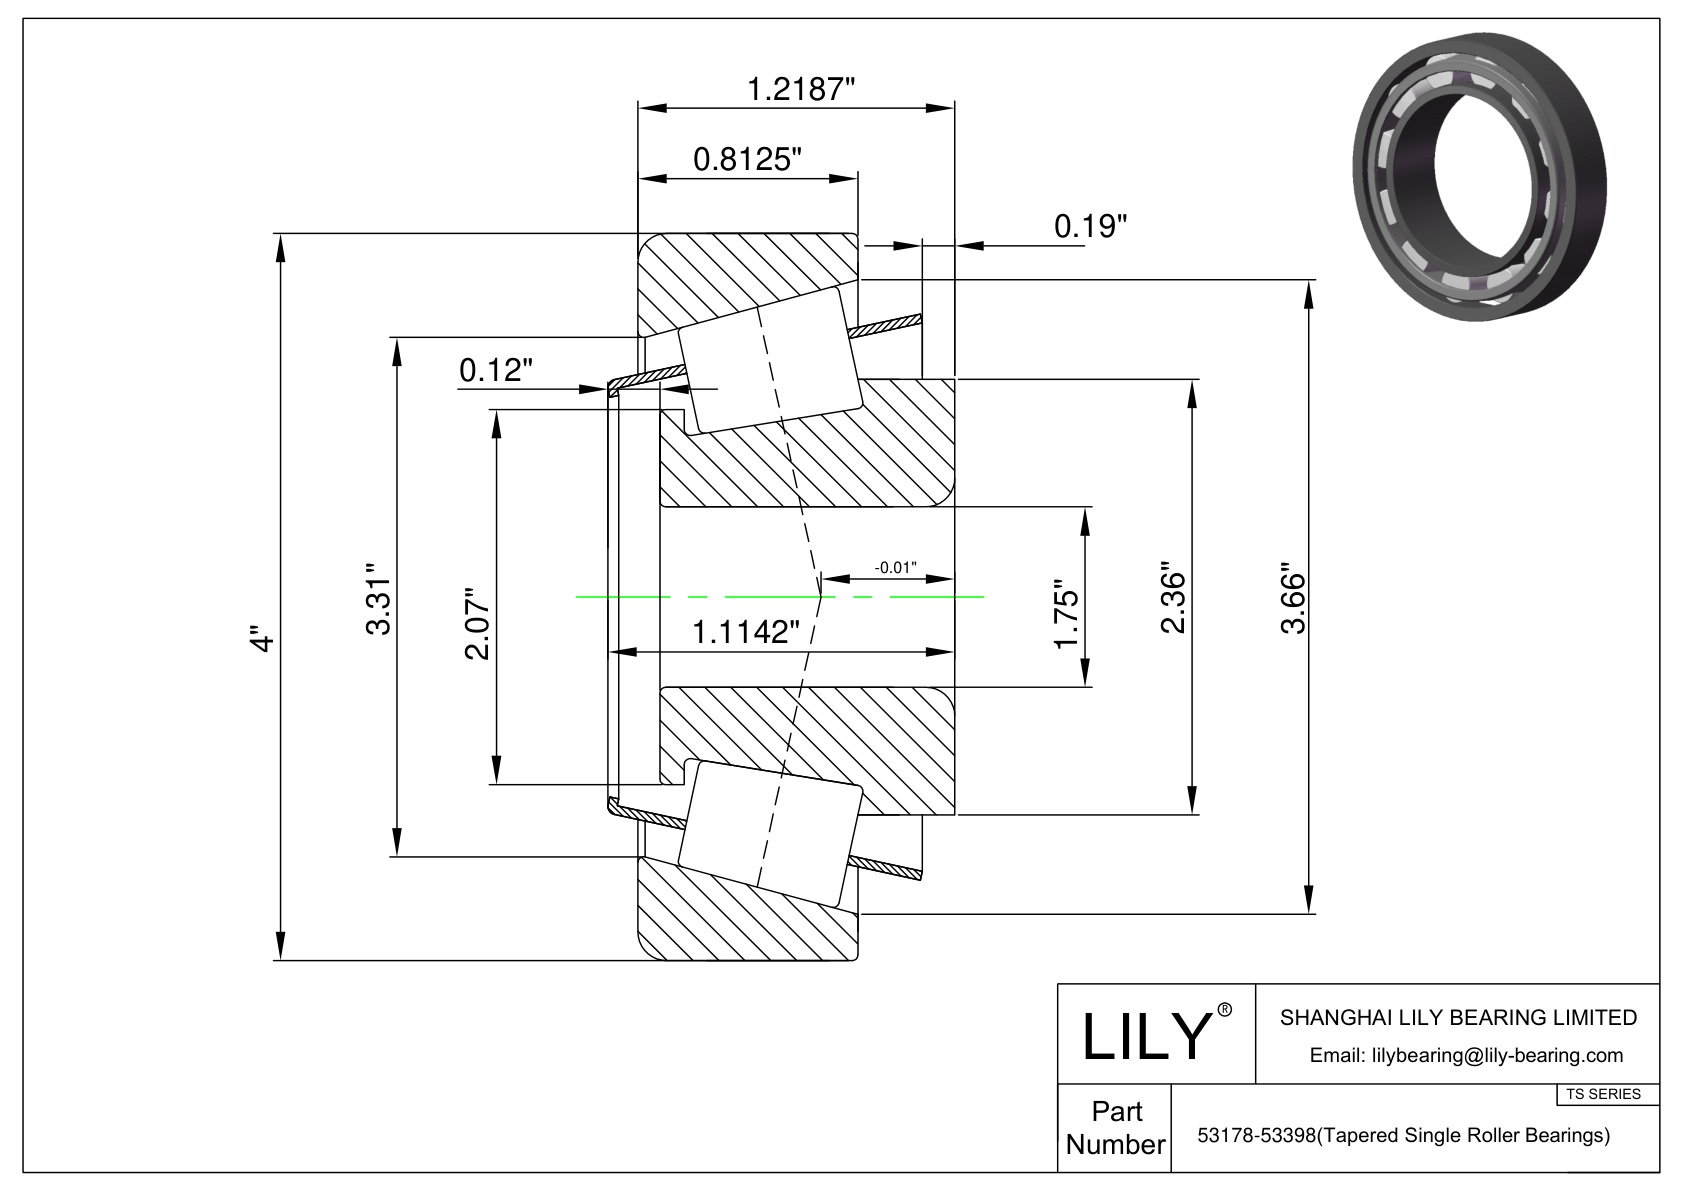 53178-53398 TS (Tapered Single Roller Bearings) (Imperial) cad drawing